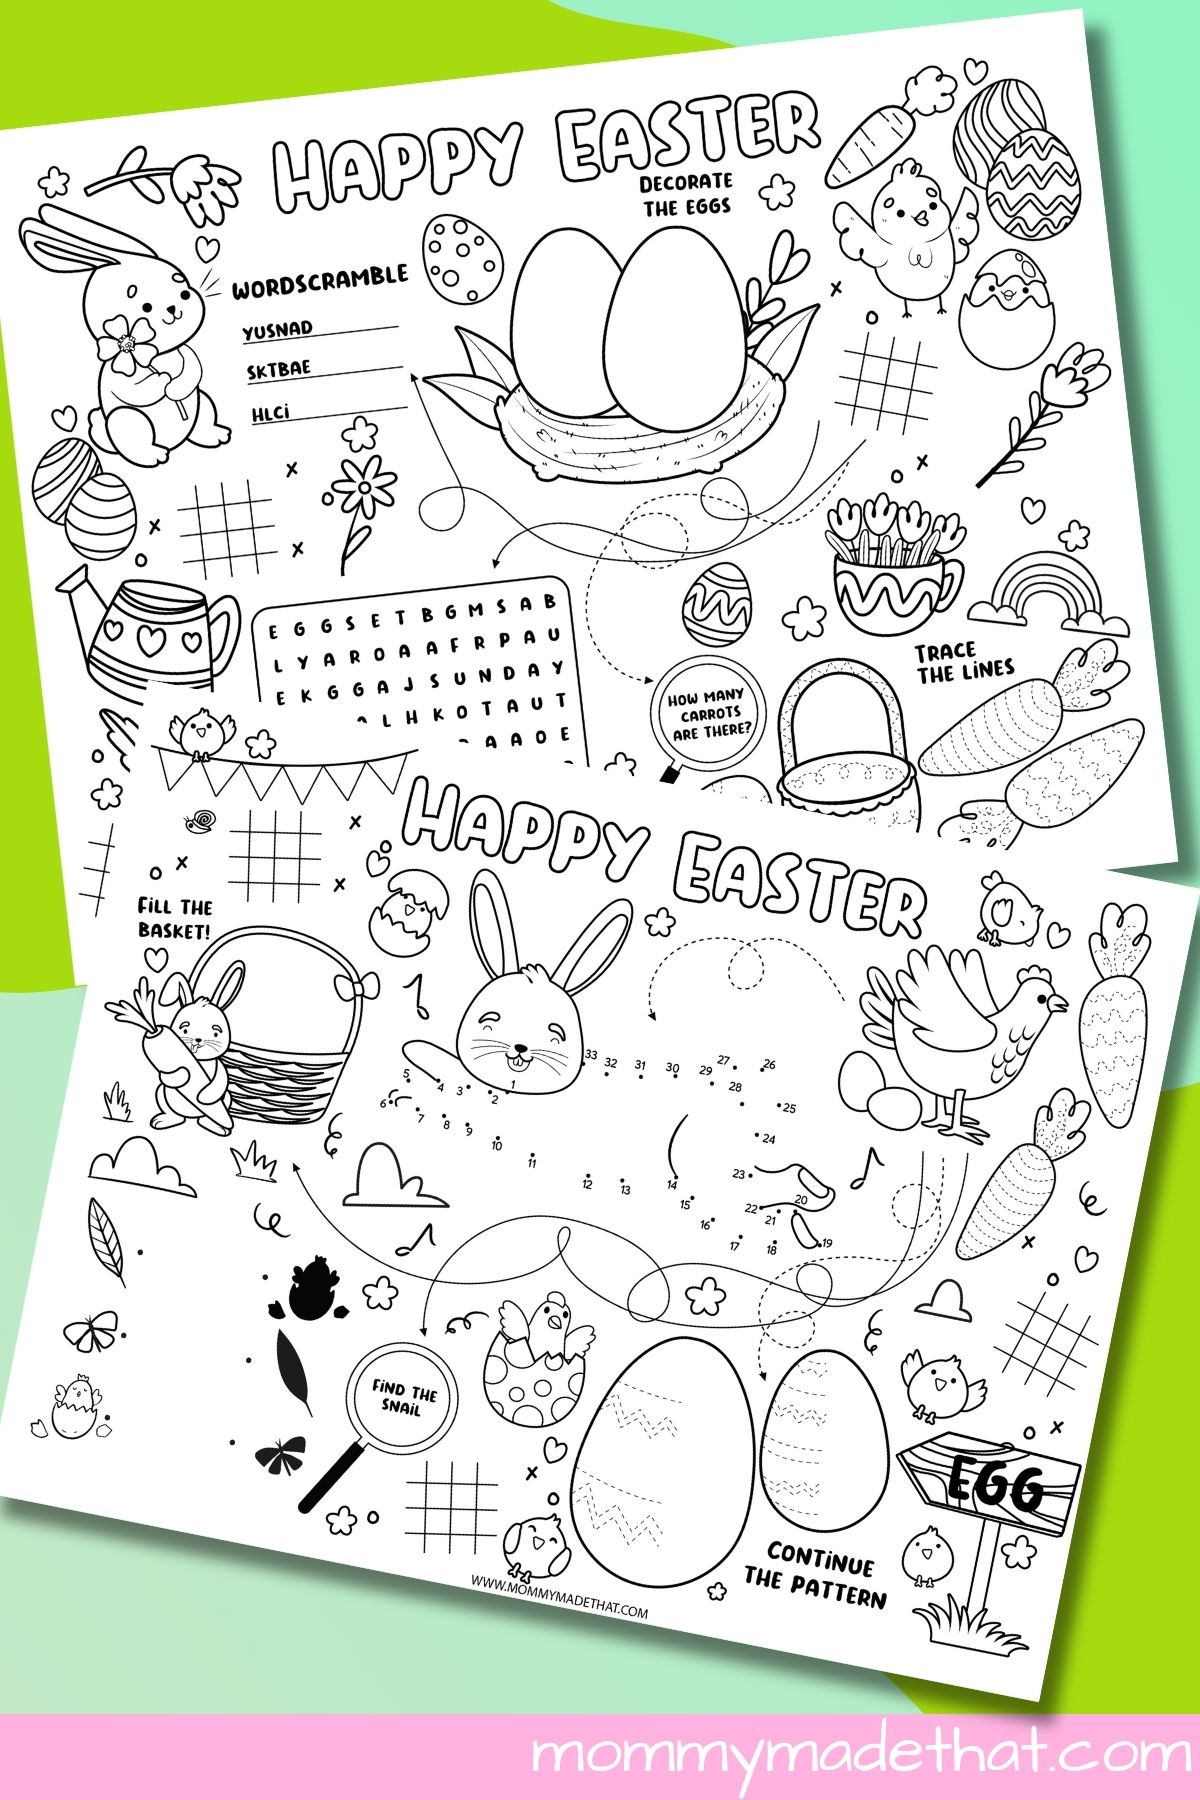 Printable Easter Placemats.